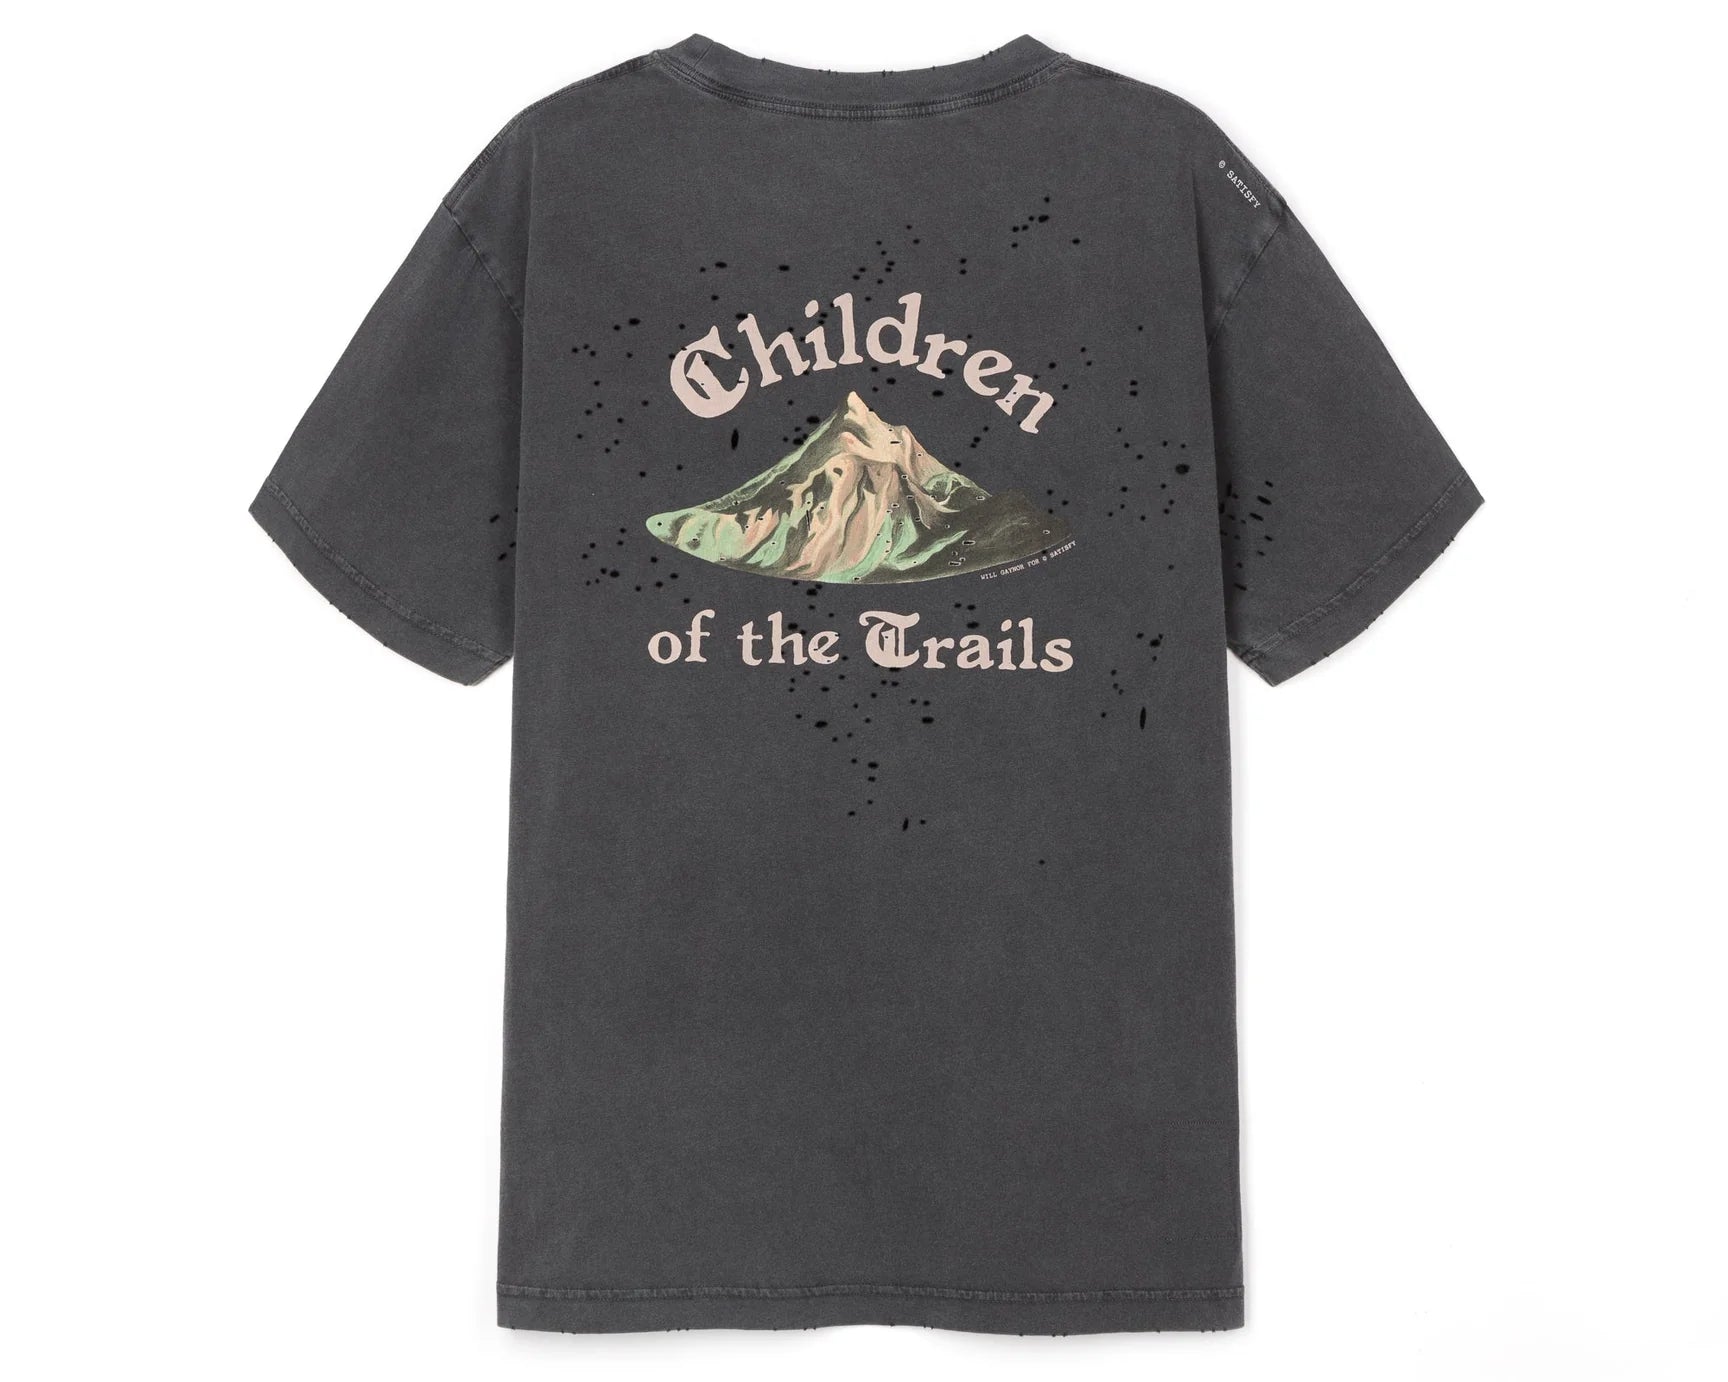 SATISFY - MothTech T-shirt - Children of the Trails - Space Camp